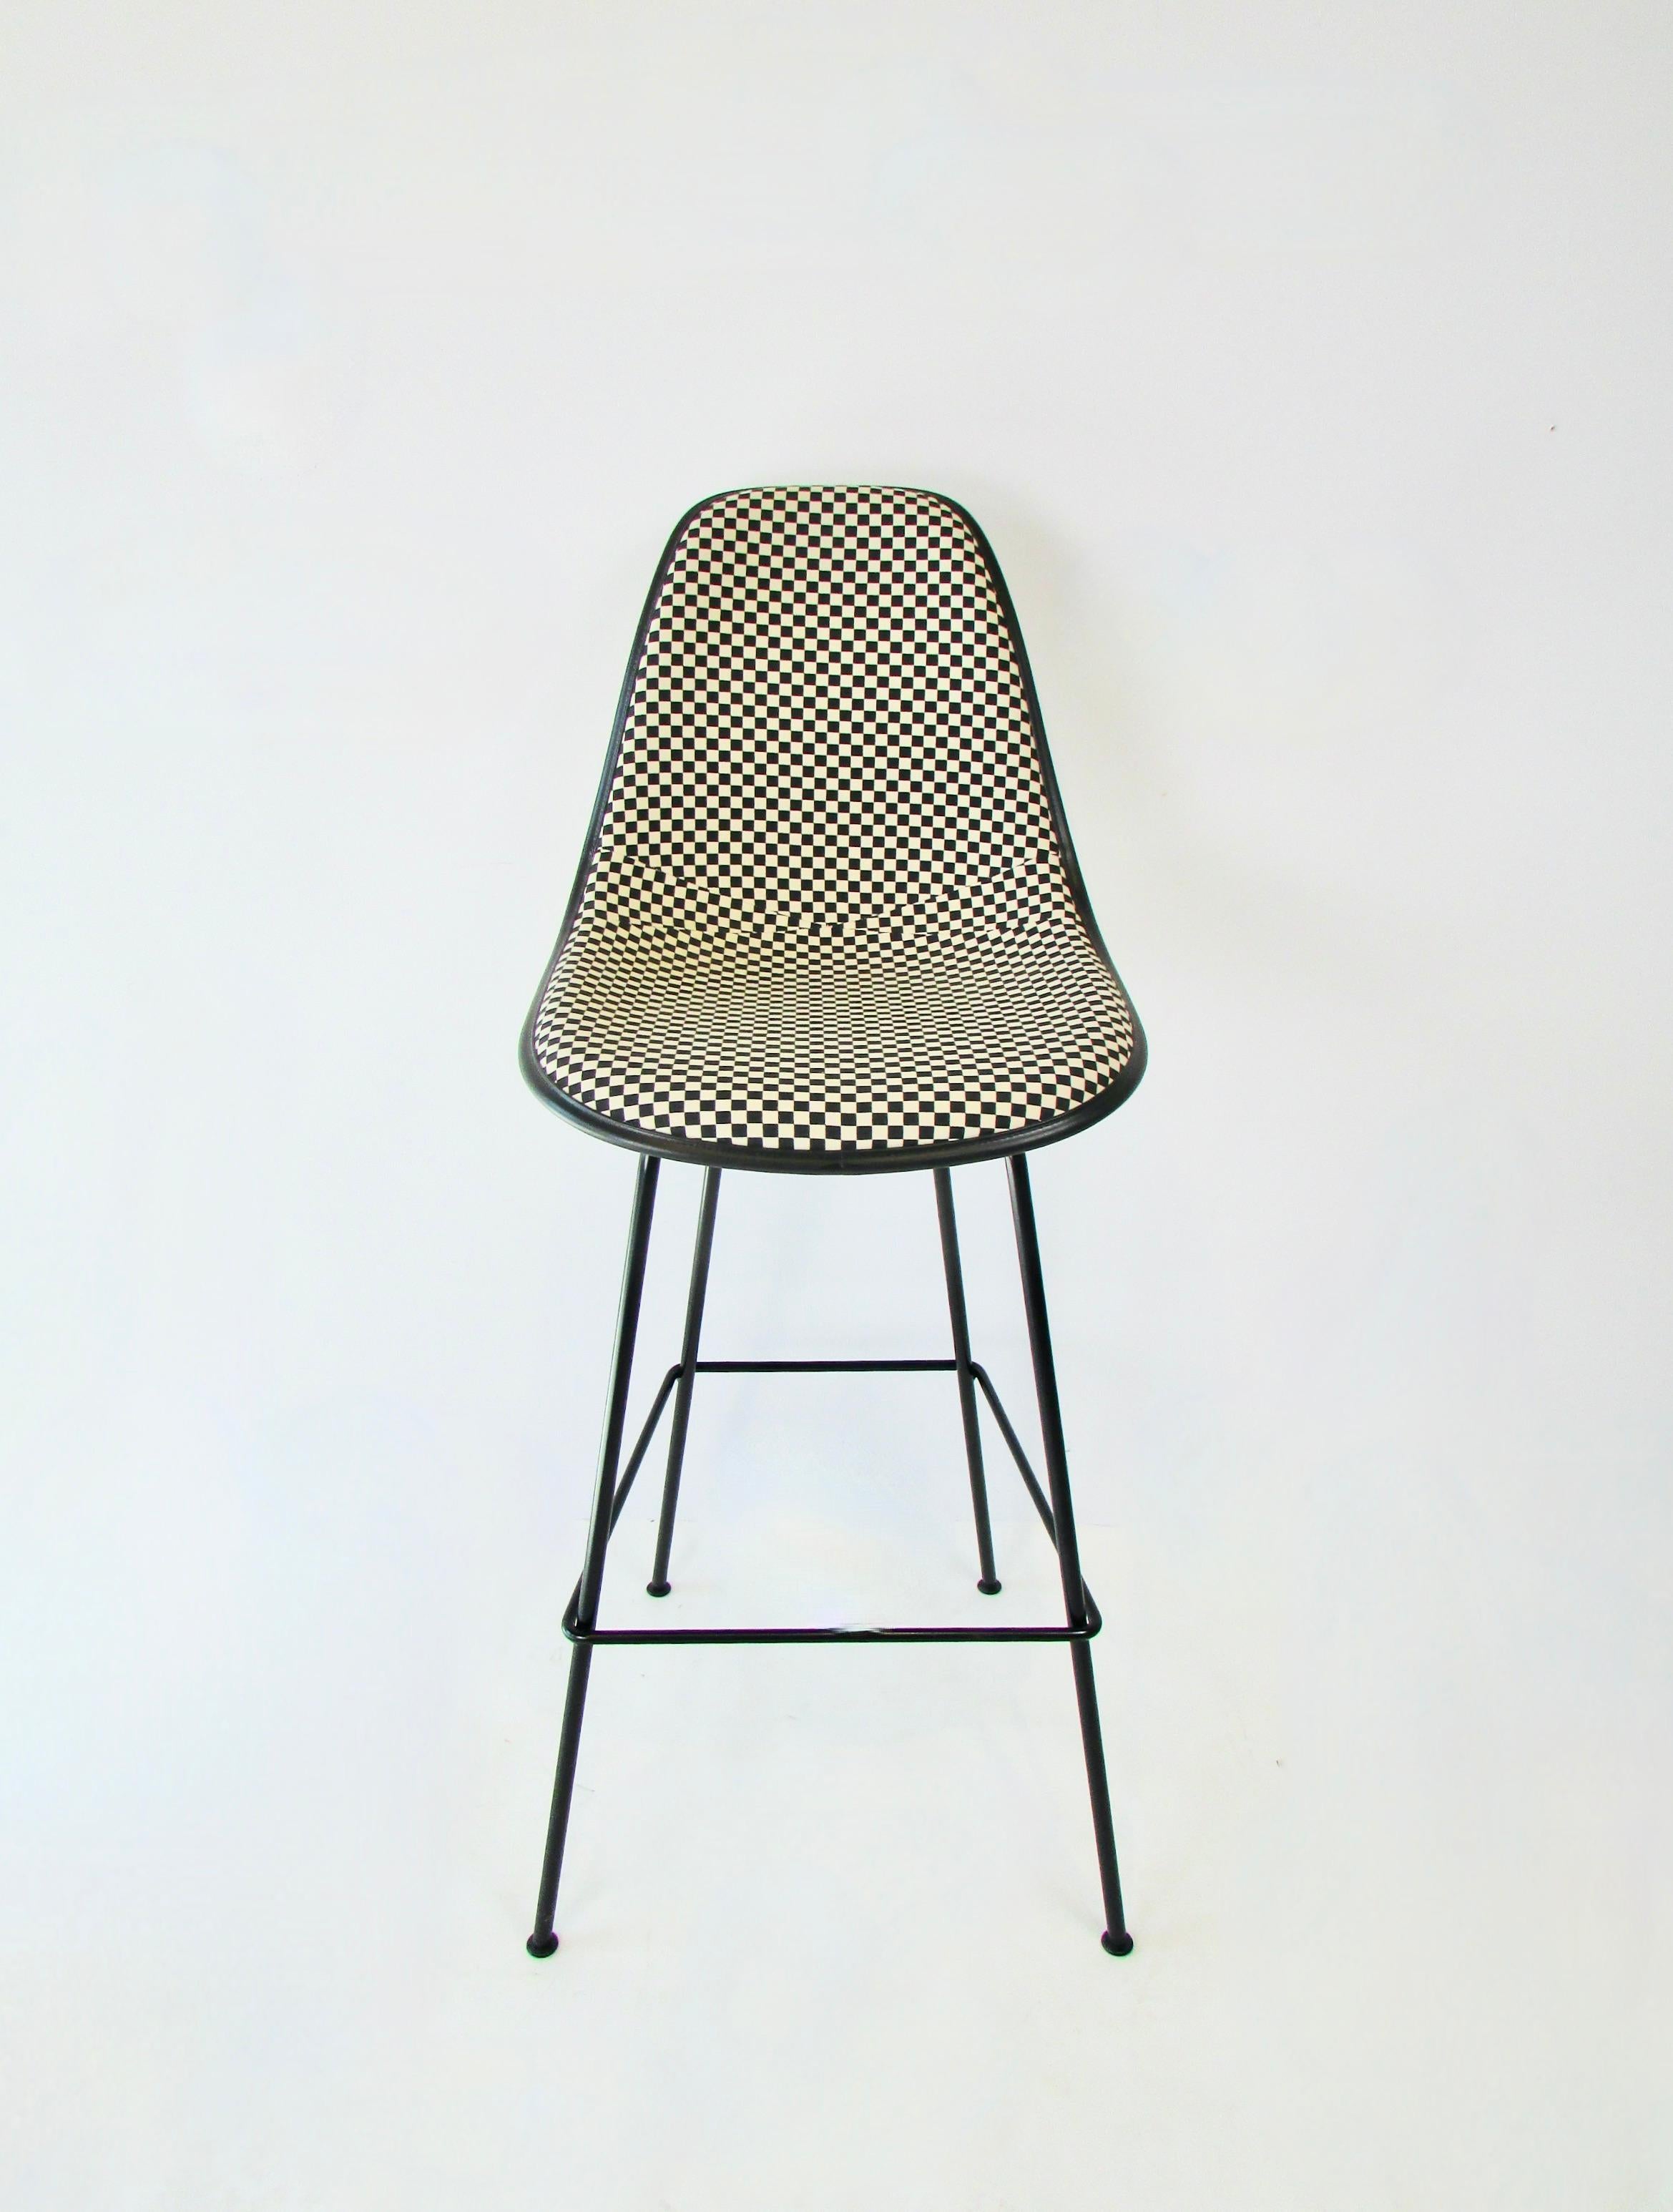 Excellent and basically brand new Eames for Herman Miller barstools. Client bought the set and decided to go in a different direction. I traded them. Never sat in. Wonderful Alexander Girard 